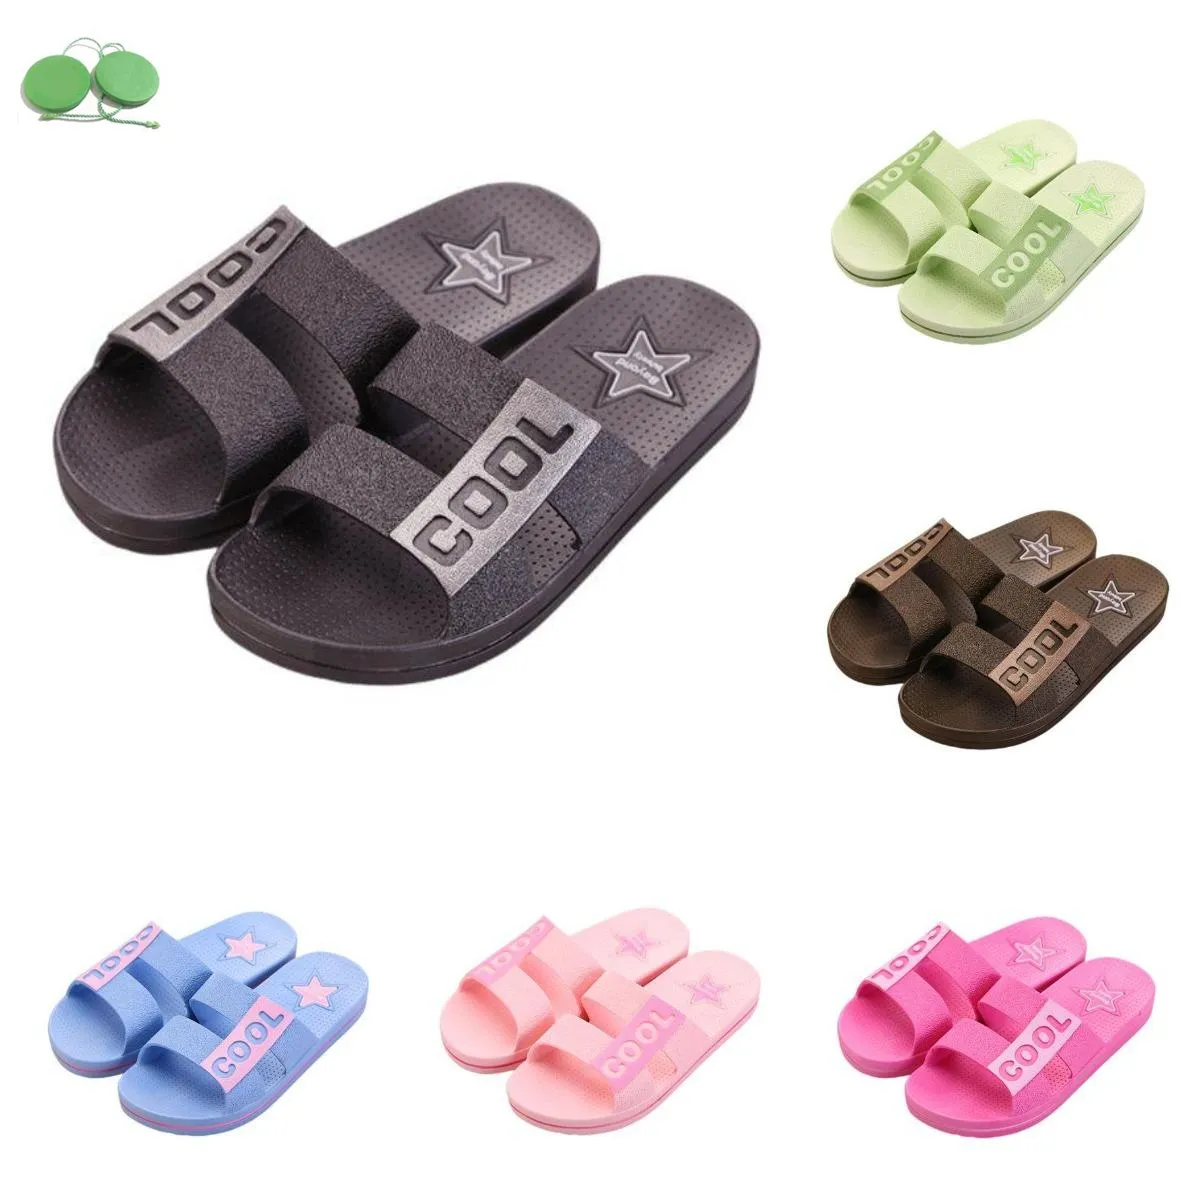 Slipper Designer rubber Slides Women Sandals Heels Cotton Fabric Straw Casual slippers for spring and autumn Flat Comfort Mules Padded Shoe big size